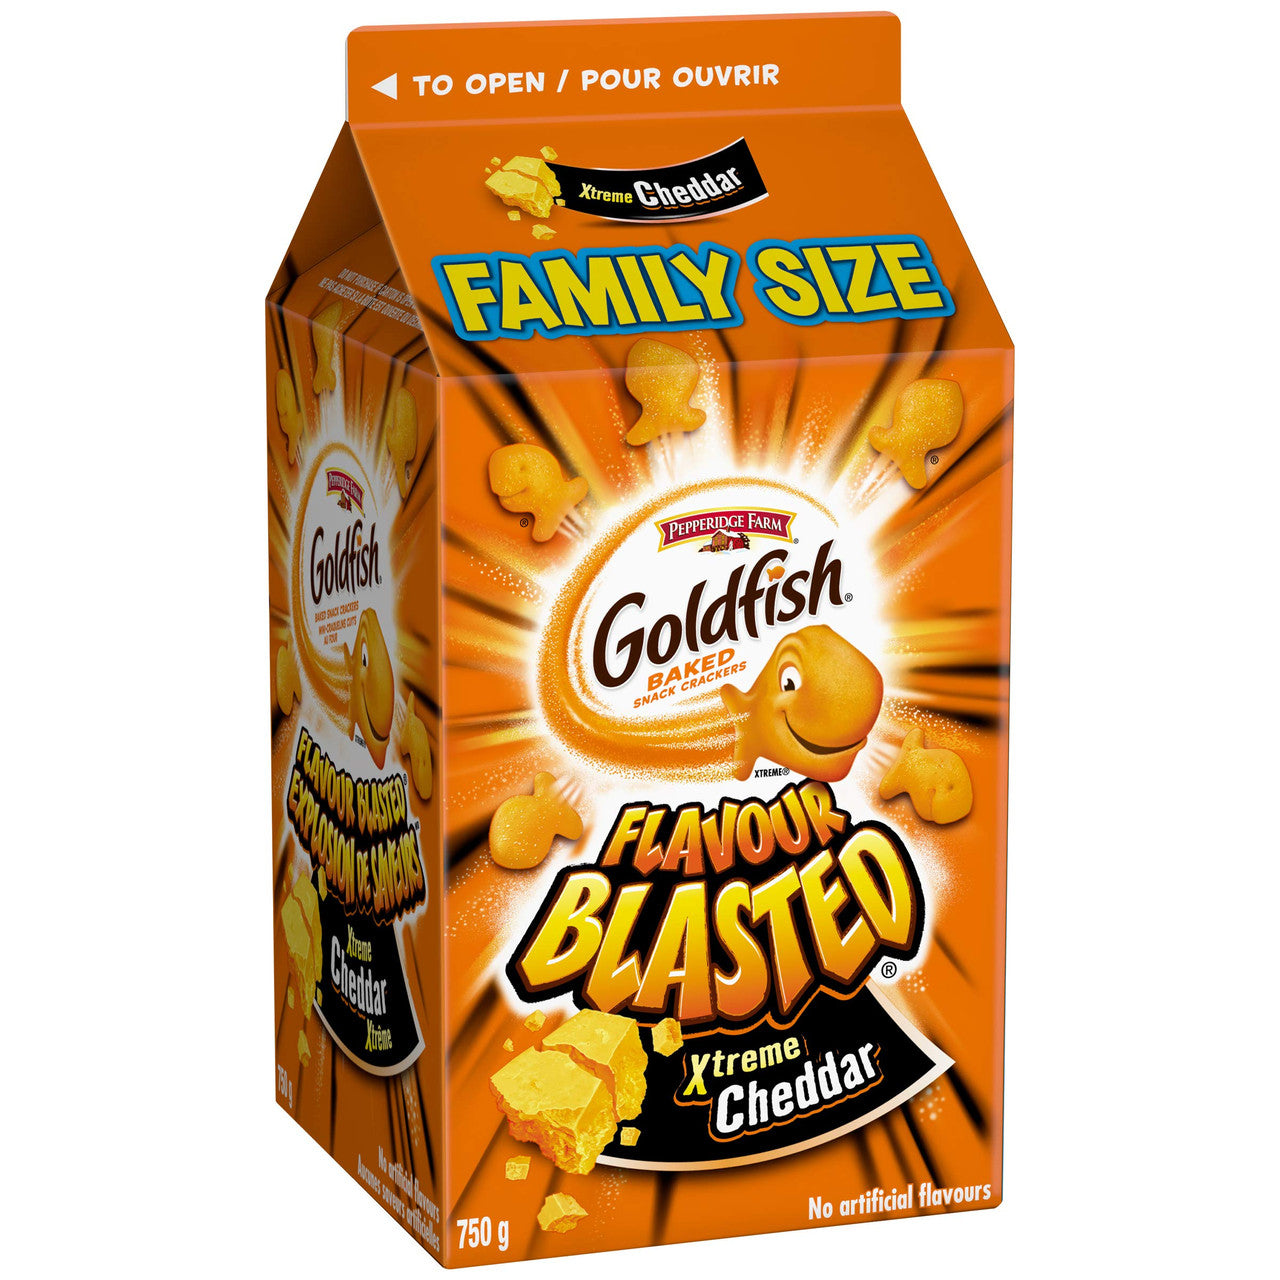 Pepperidge Farm Goldfish Flavour Blasted Xtreme Cheddar Crackers, 750g/26.5 oz., {Imported from Canada}